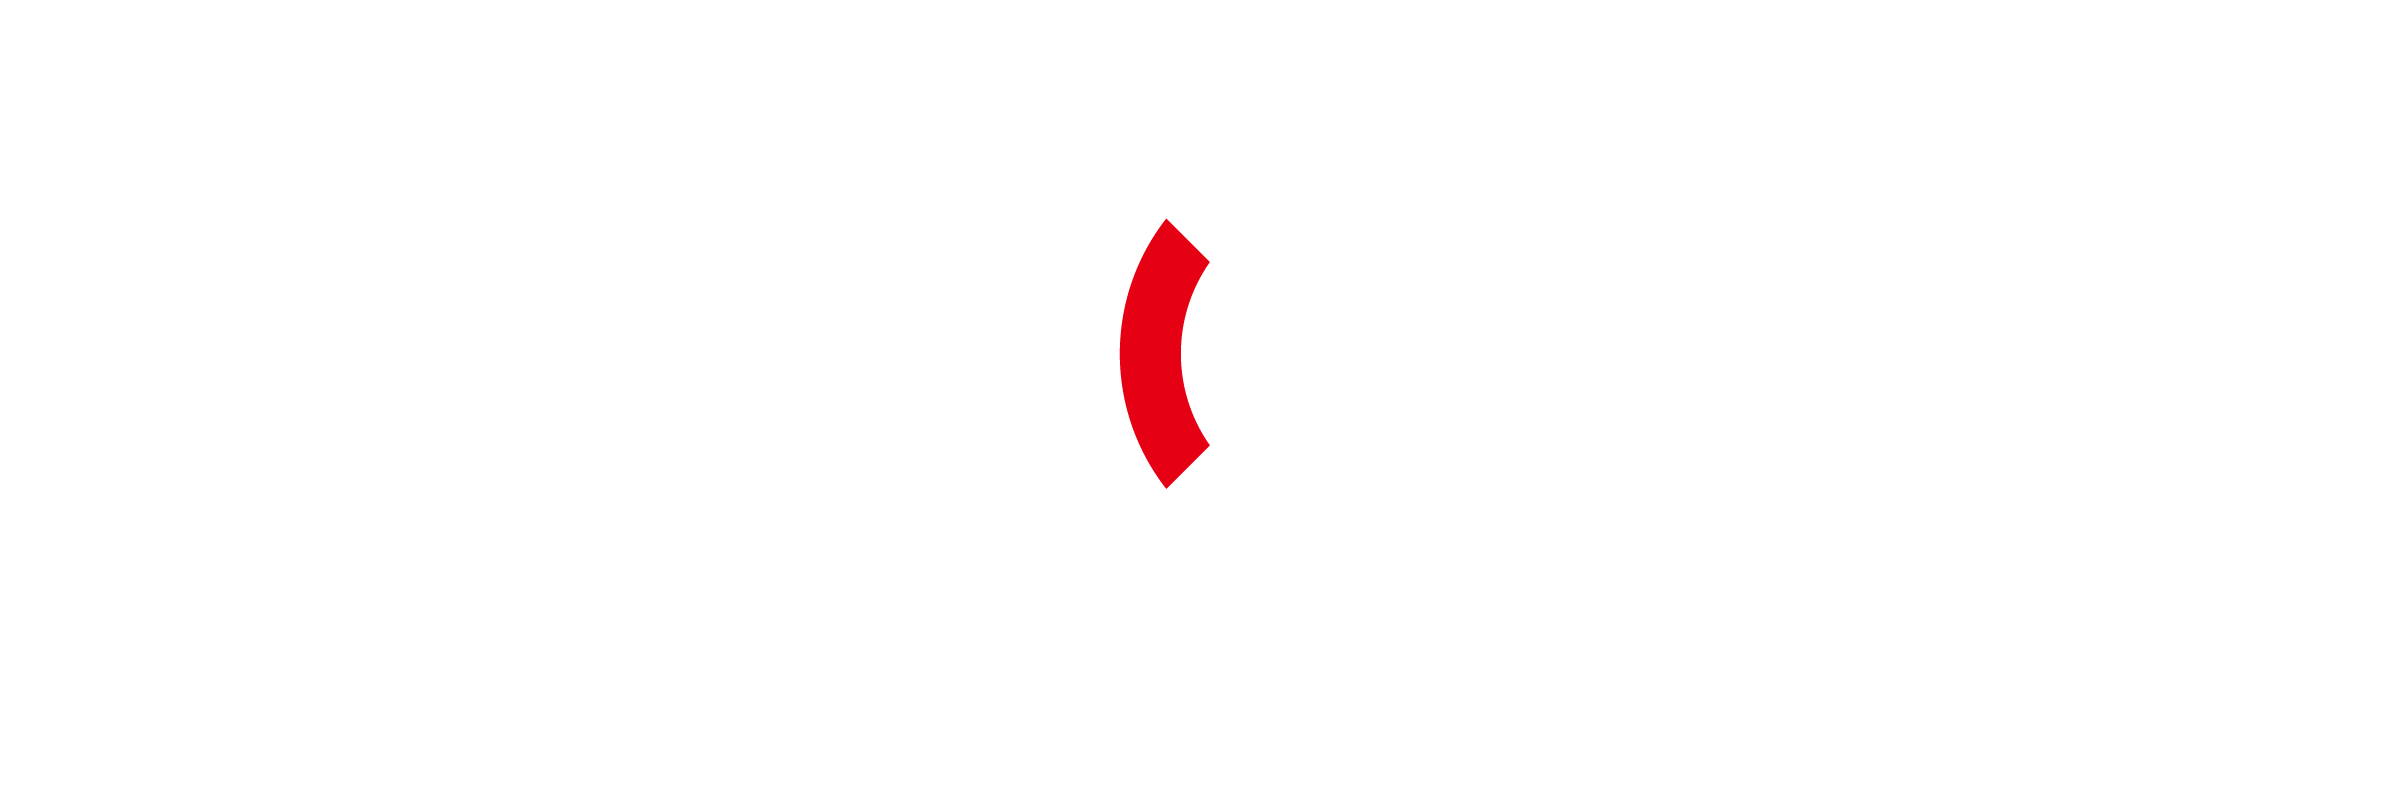 Logos Defontaine Group